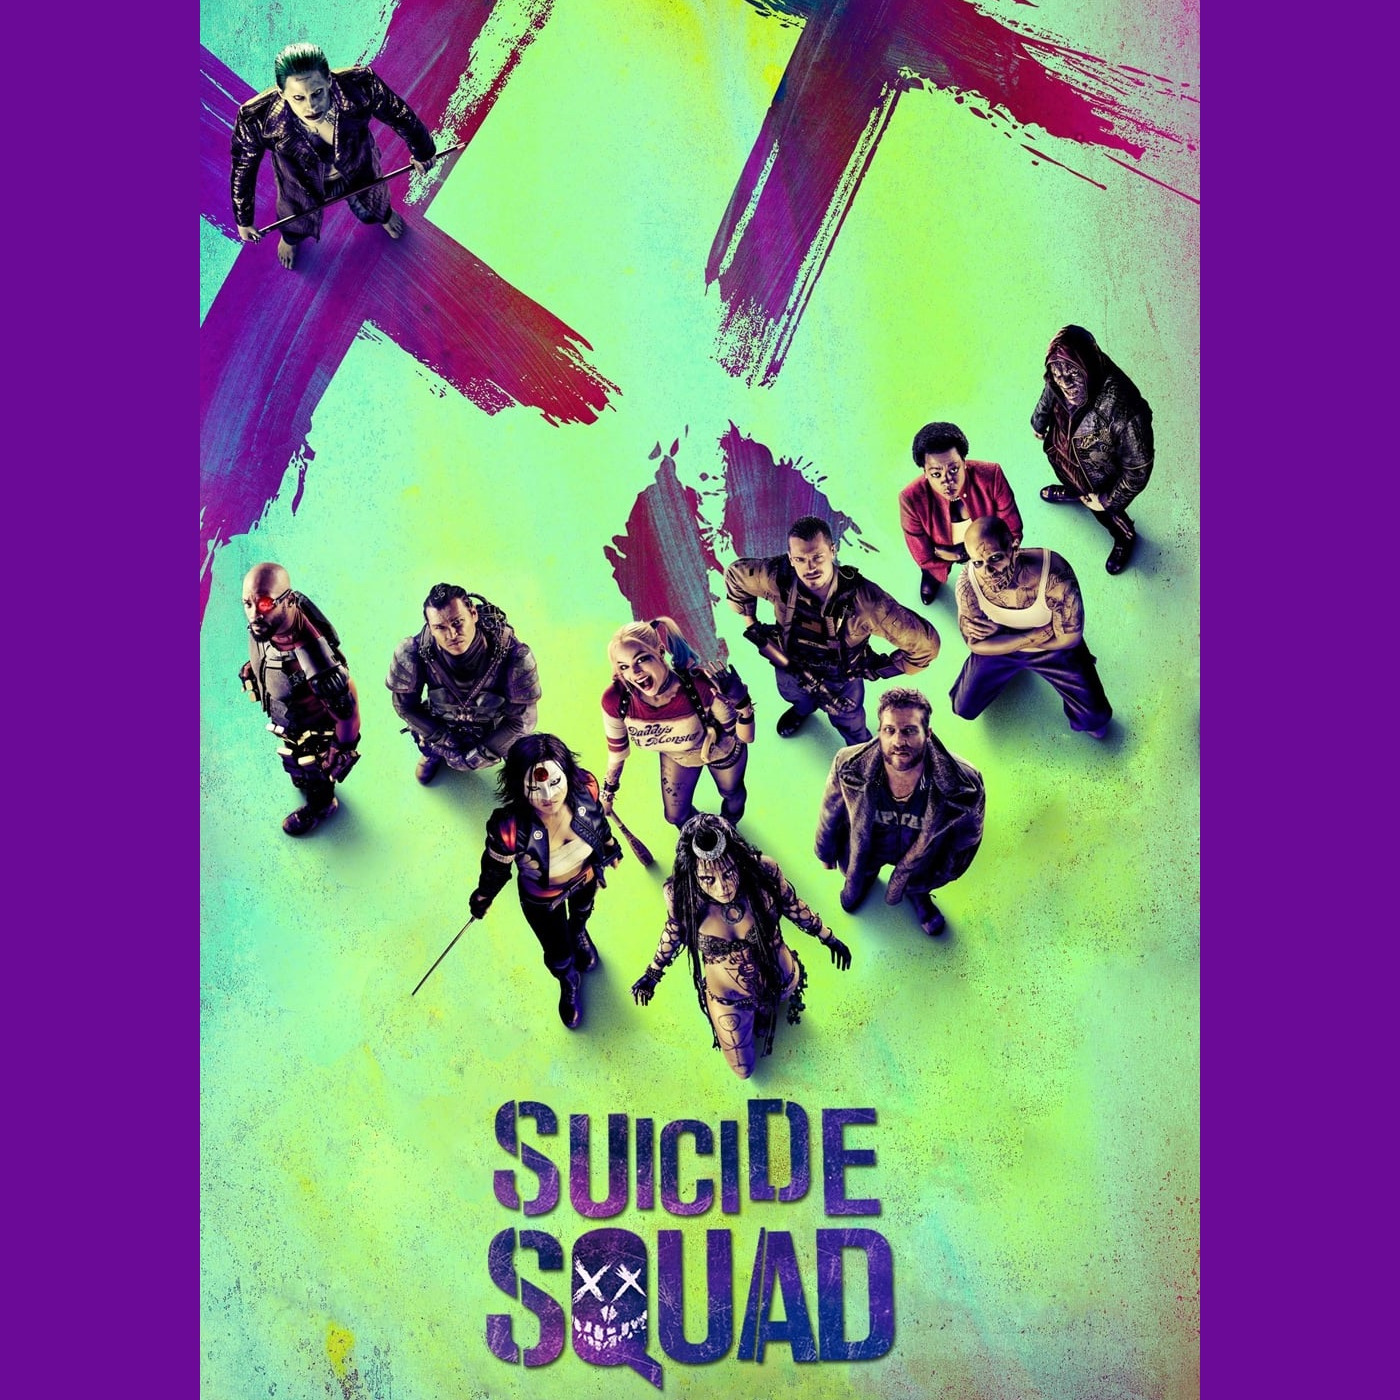 Episode 177: [REBROADCAST] Suicide Squad Theatrical Cut audio commentary